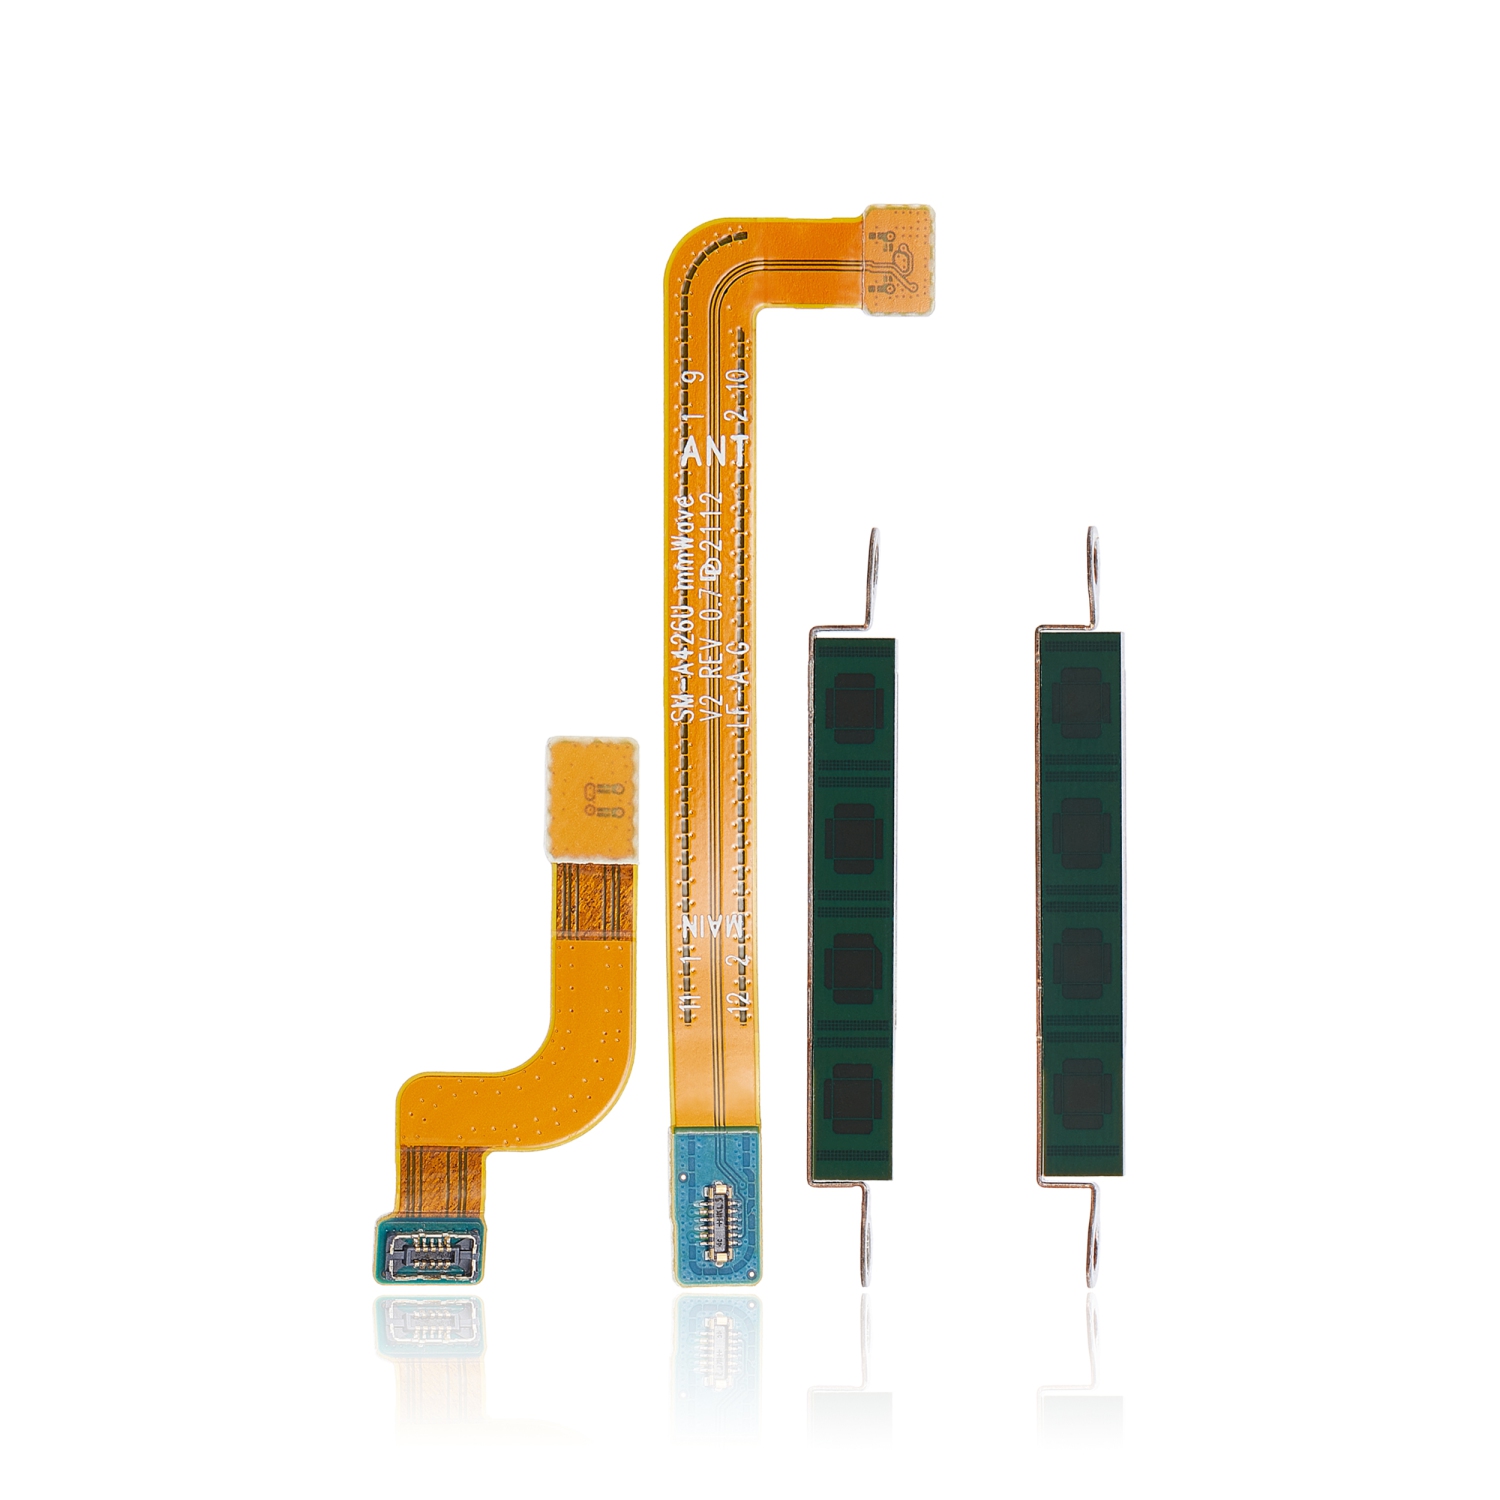 Replacement 5G Antenna Flex Cable With Module Compatible For Samsung Galaxy A42 5G (A426 / 2020) (4 Piece Set)